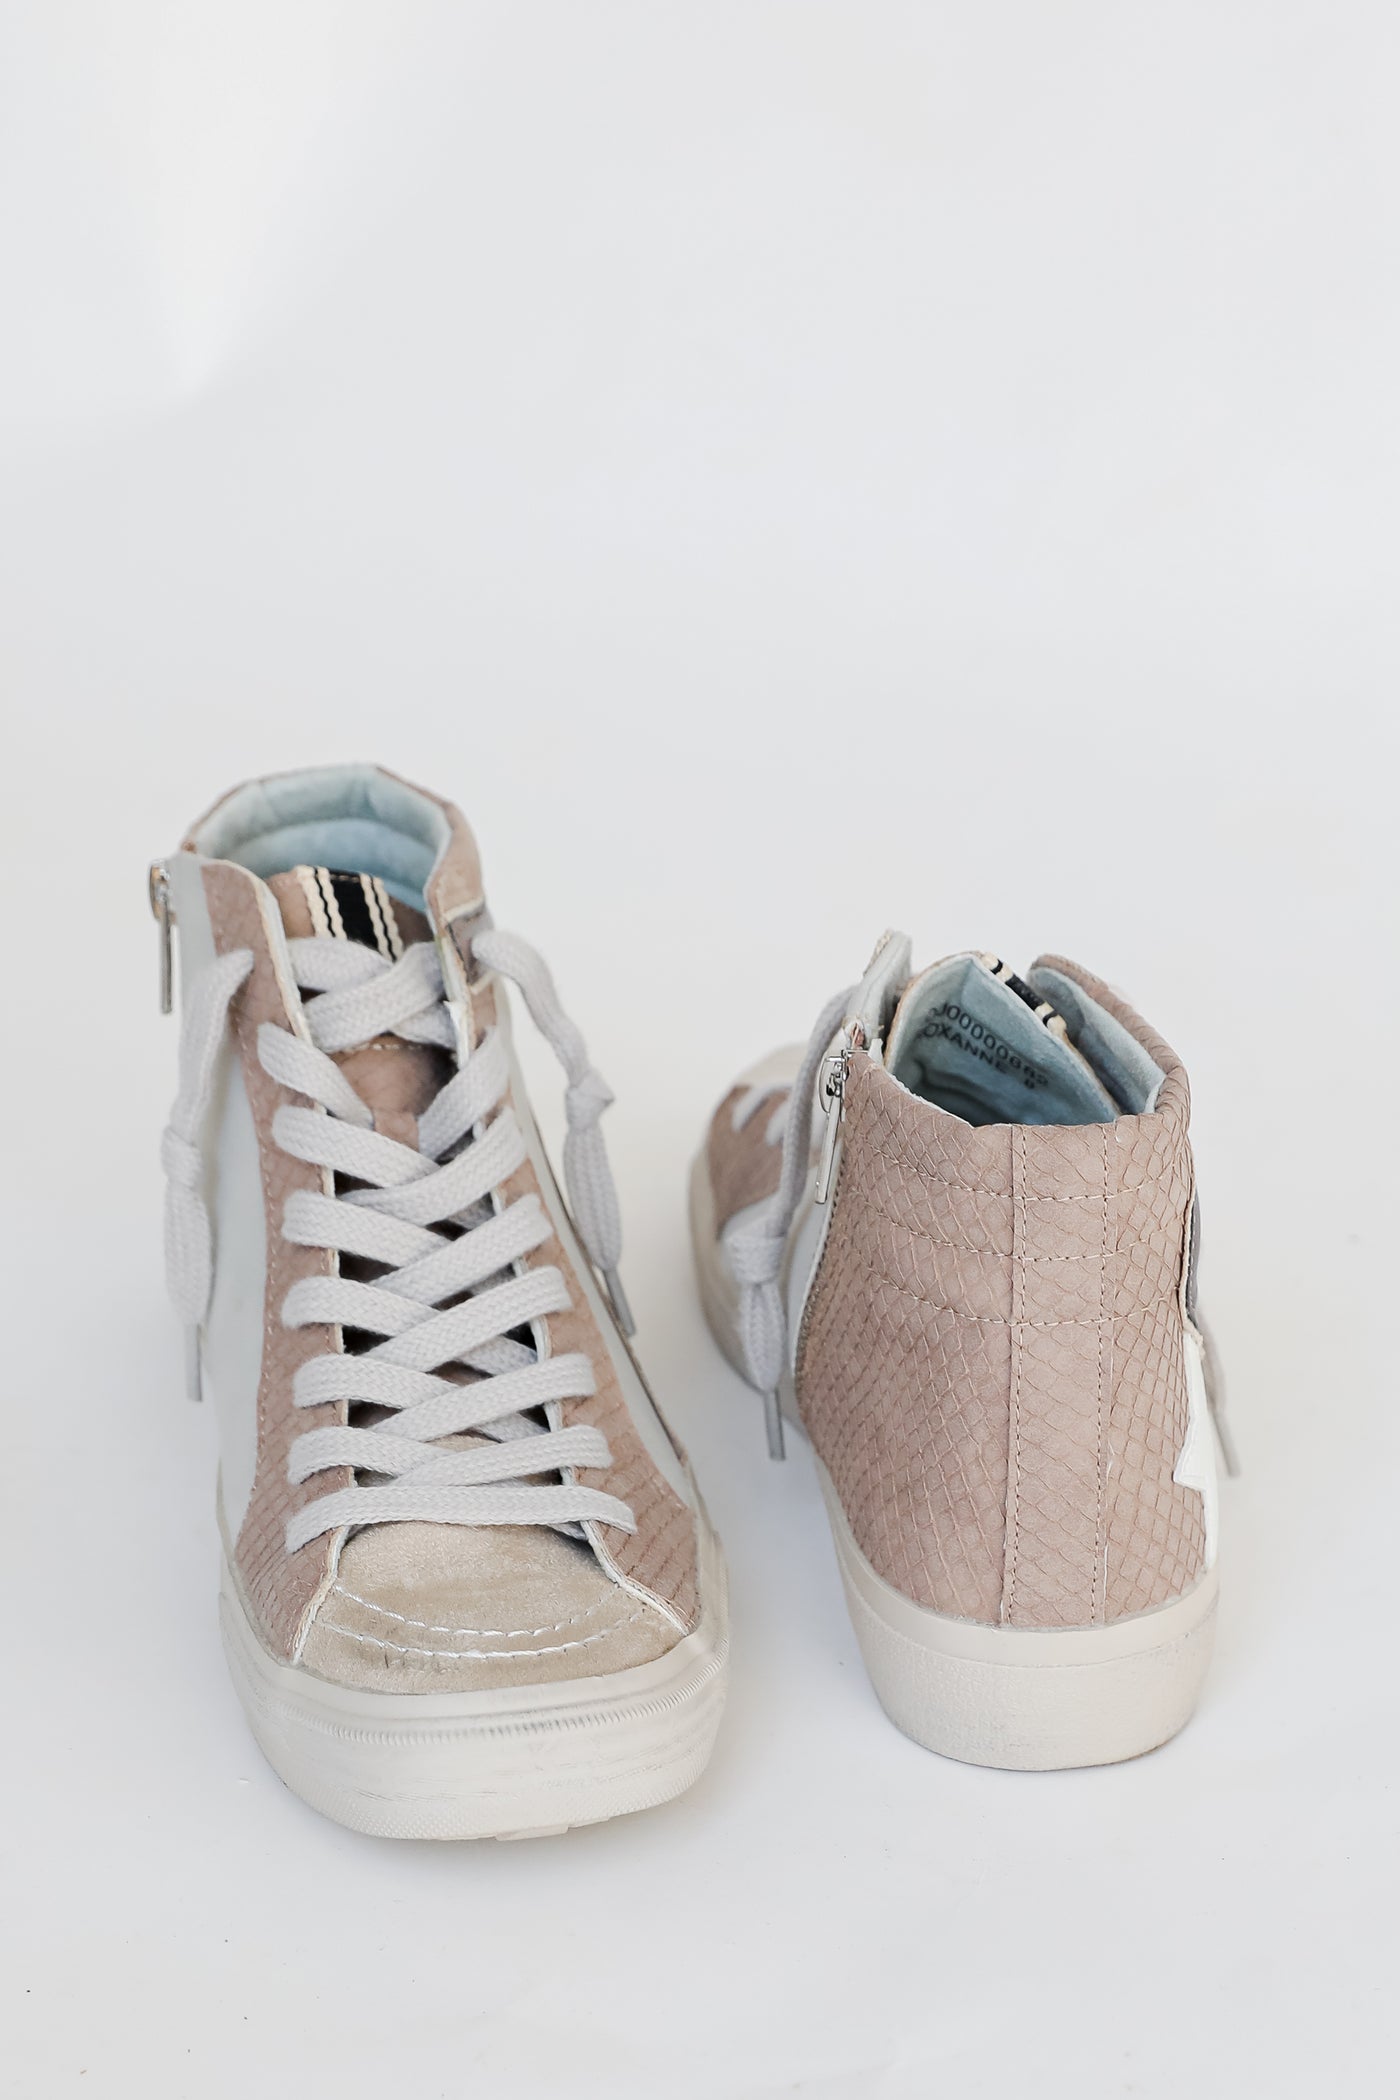 High Top Star Sneakers from dress up